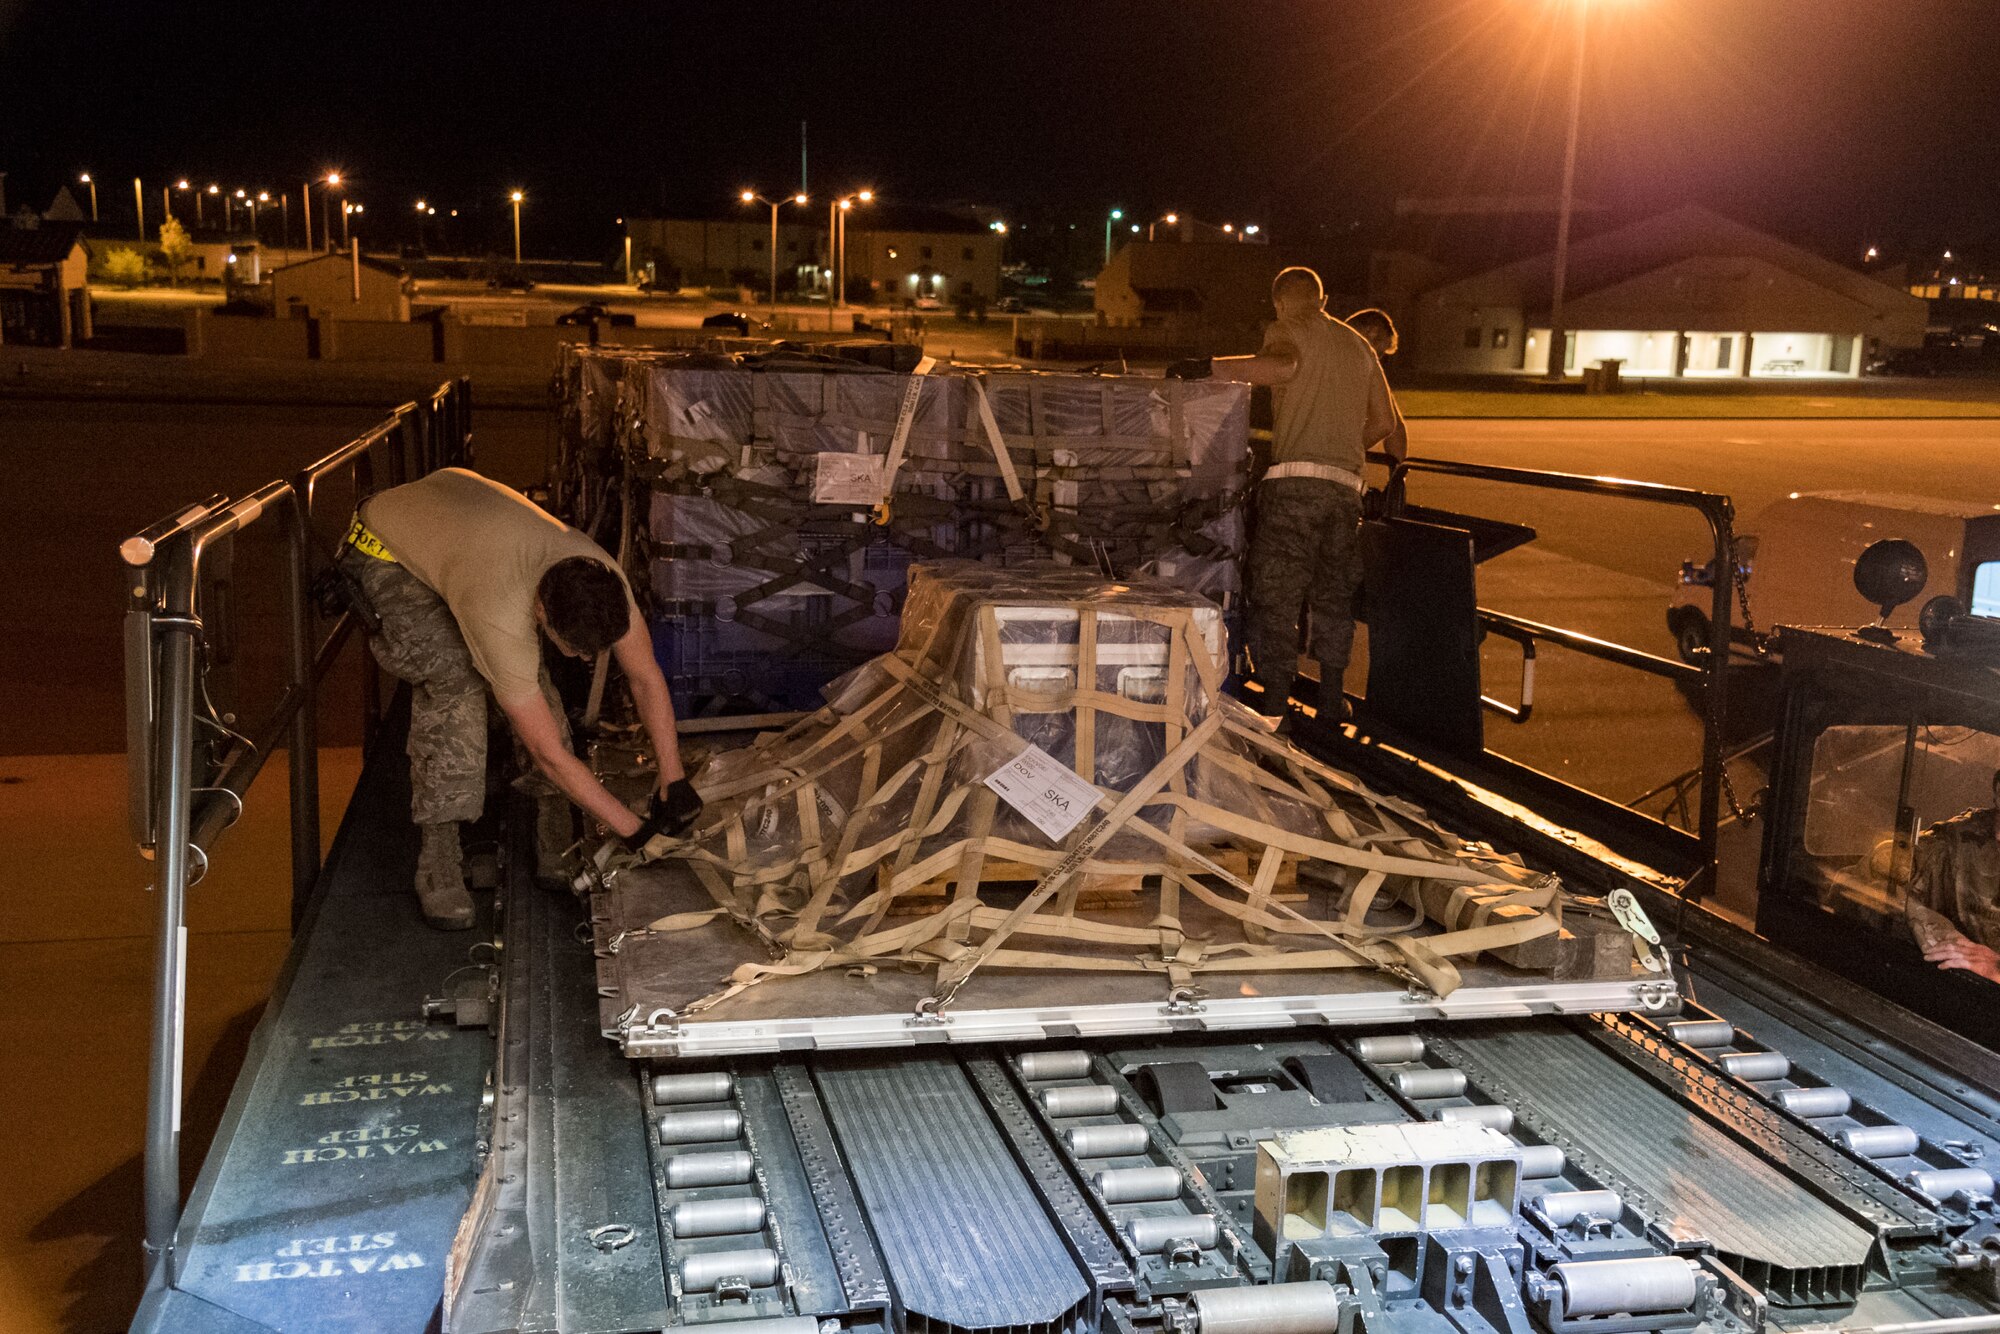 Members of 436th Aerial Port Squadron ramp services section look over cargo netting prior to loading the pallets on an Air Transport International Boeing 757-200 aircraft Sept. 8, 2019, at Dover Air Force Base, Del. The ATI aircraft, part of the Civil Reserve Air Fleet program, was contracted to transport cargo and 30 Team Dover personnel to Fairchild AFB, Wash., participating in Mobility Guardian 2019. “Air Mobility Command’s commercial airlift partners are a vital part of our daily airlift missions around the world as well as our wartime effort,” said Maj. Adam Crane, AMC Headquarters CRAF Branch Chief, Scott AFB, Ill. (U.S. Air Force photo by Roland Balik)